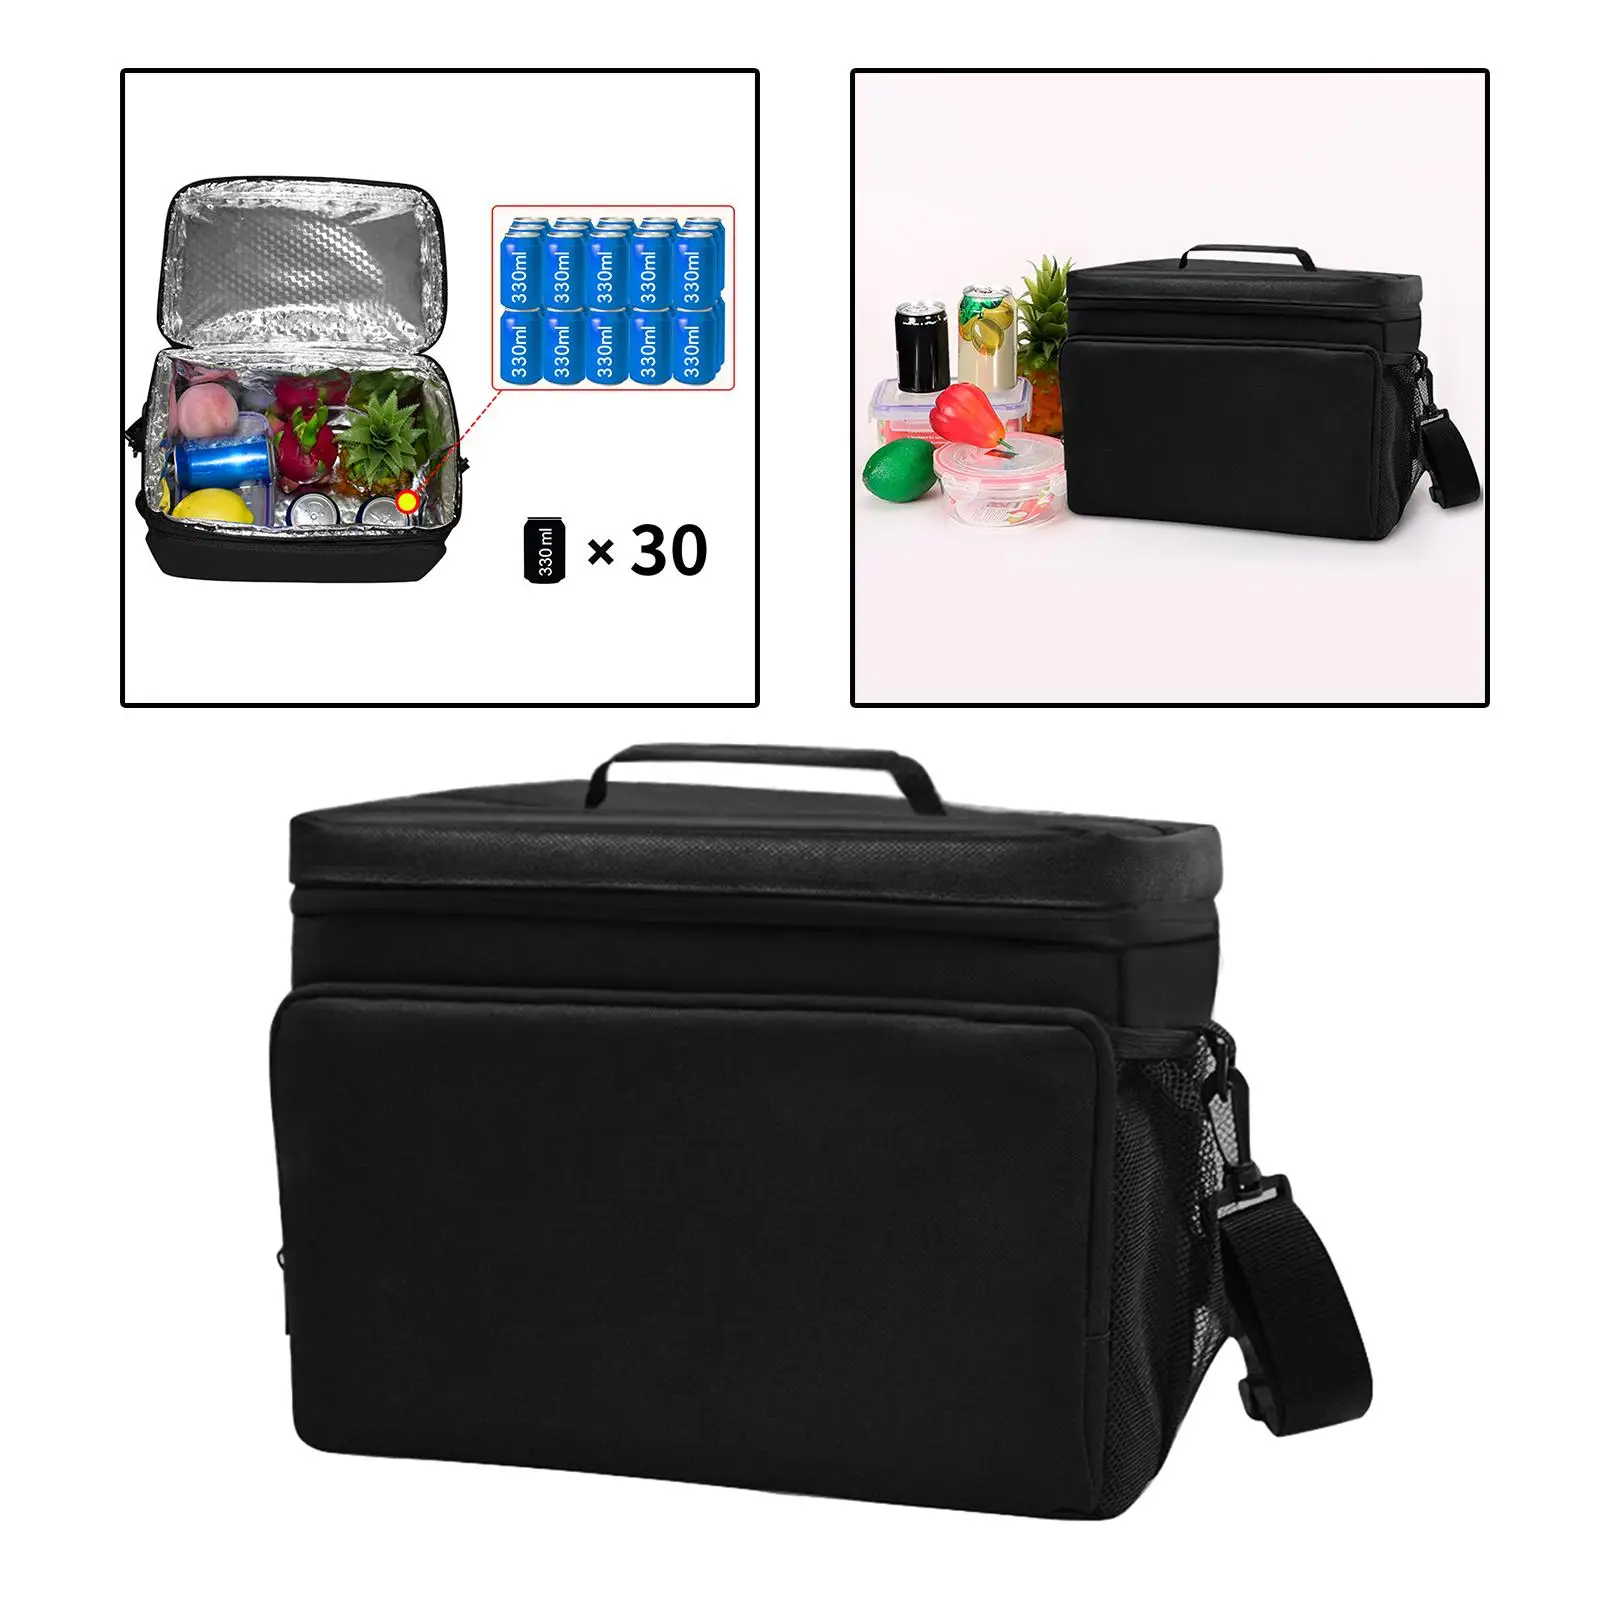 Insulated Bag Oxford Cloth Leakproof with Shoulder Strap Large Capacity Food Container Lunch Bag Storage for Camping Travel BBQ